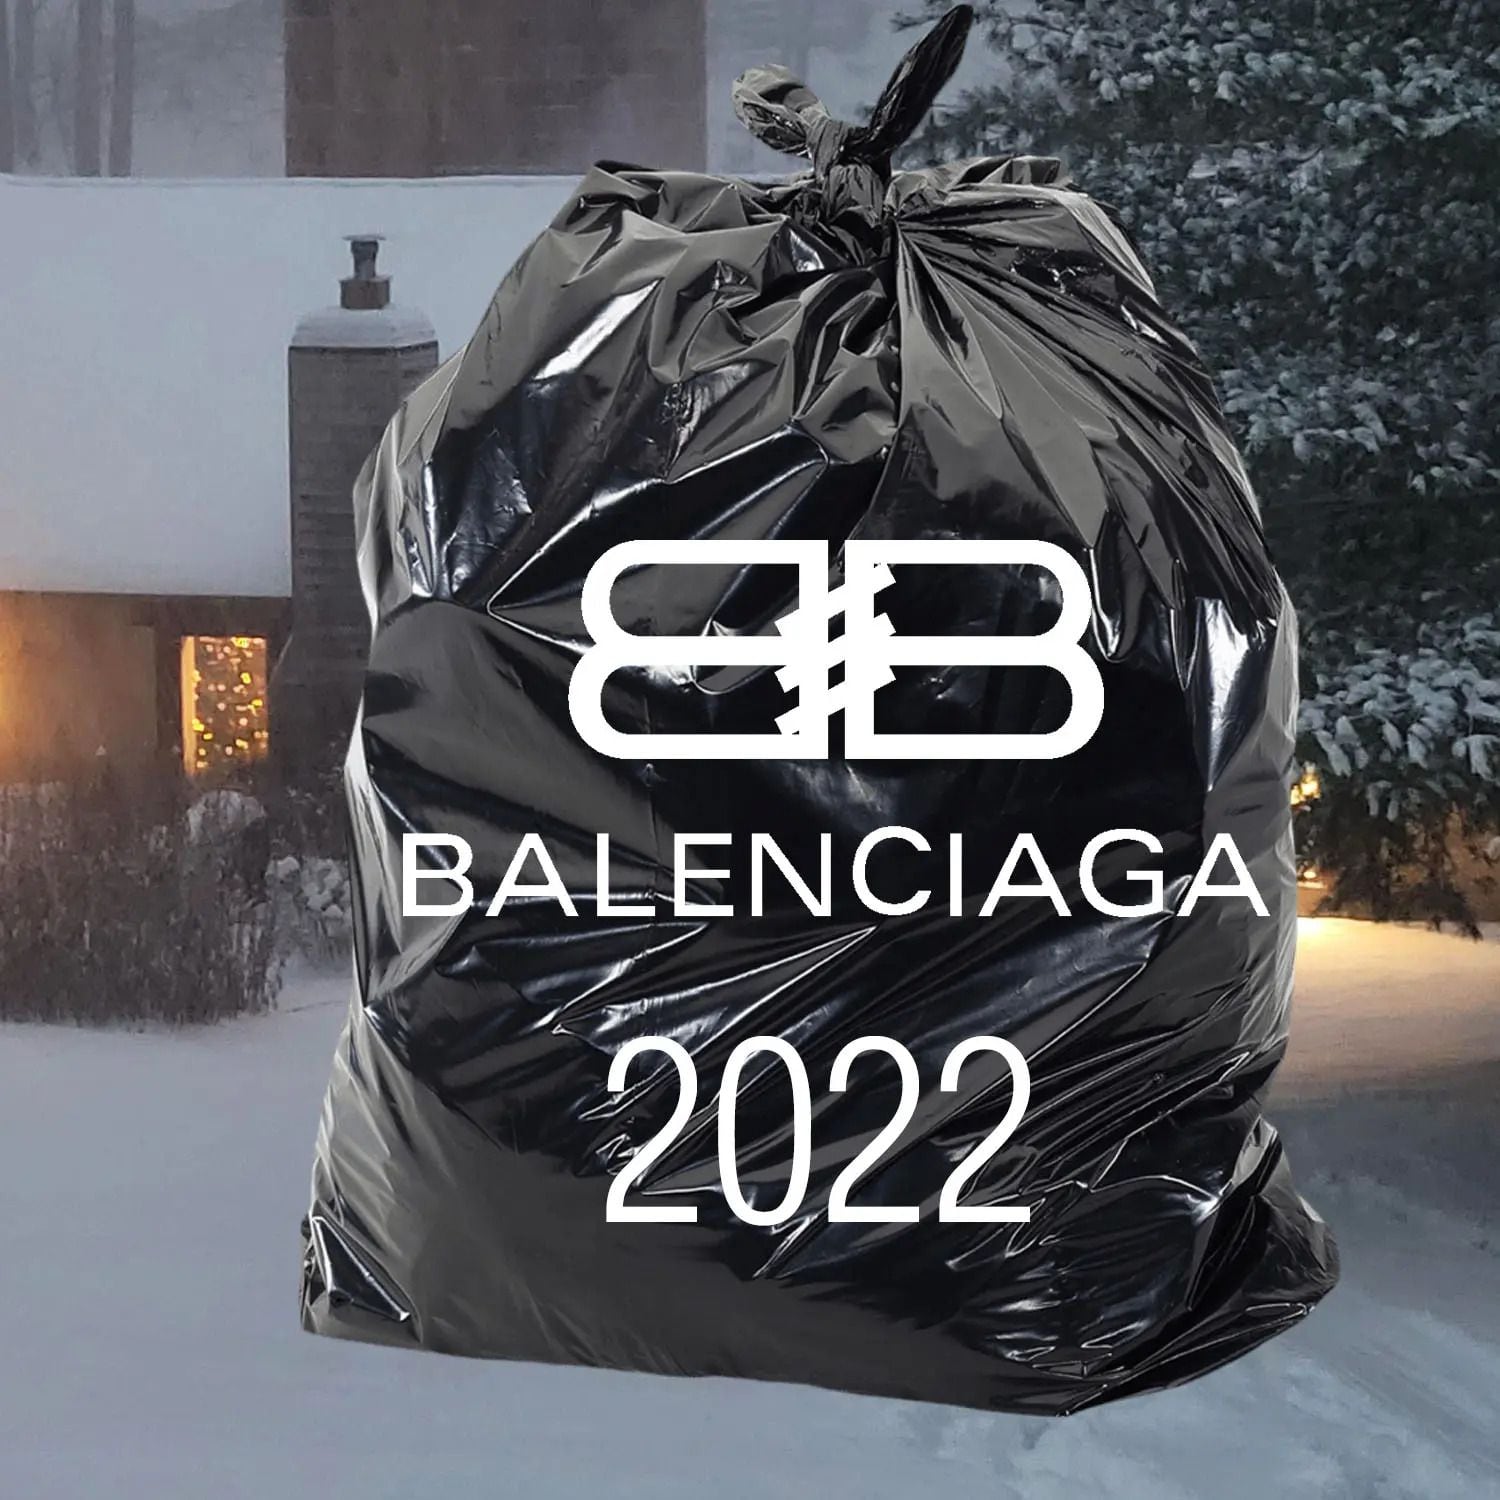 Priced at S$2,464, Balenciaga's latest winter collection features the Trash  Pouch, a homeless chic accessory inspired by garbage bags., bin bag, bag,  costume accessory, winter